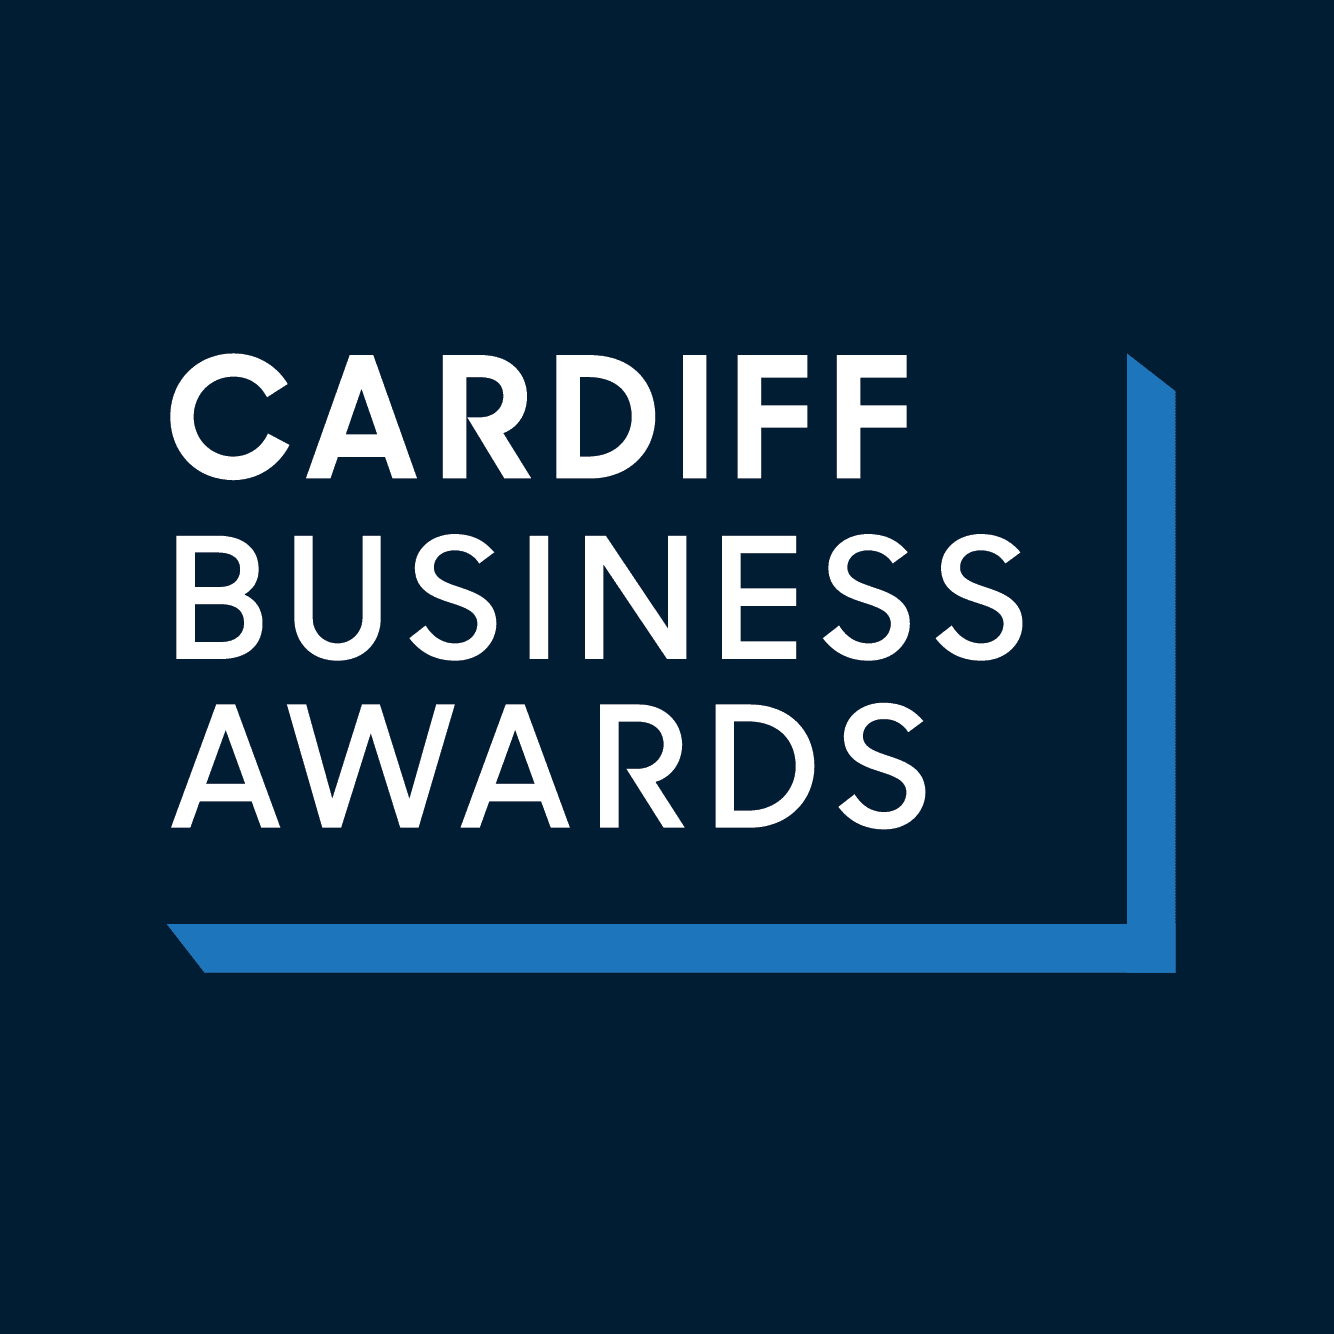 Cardiff Business Awards 2019: Genesis Biosciences up for two awards